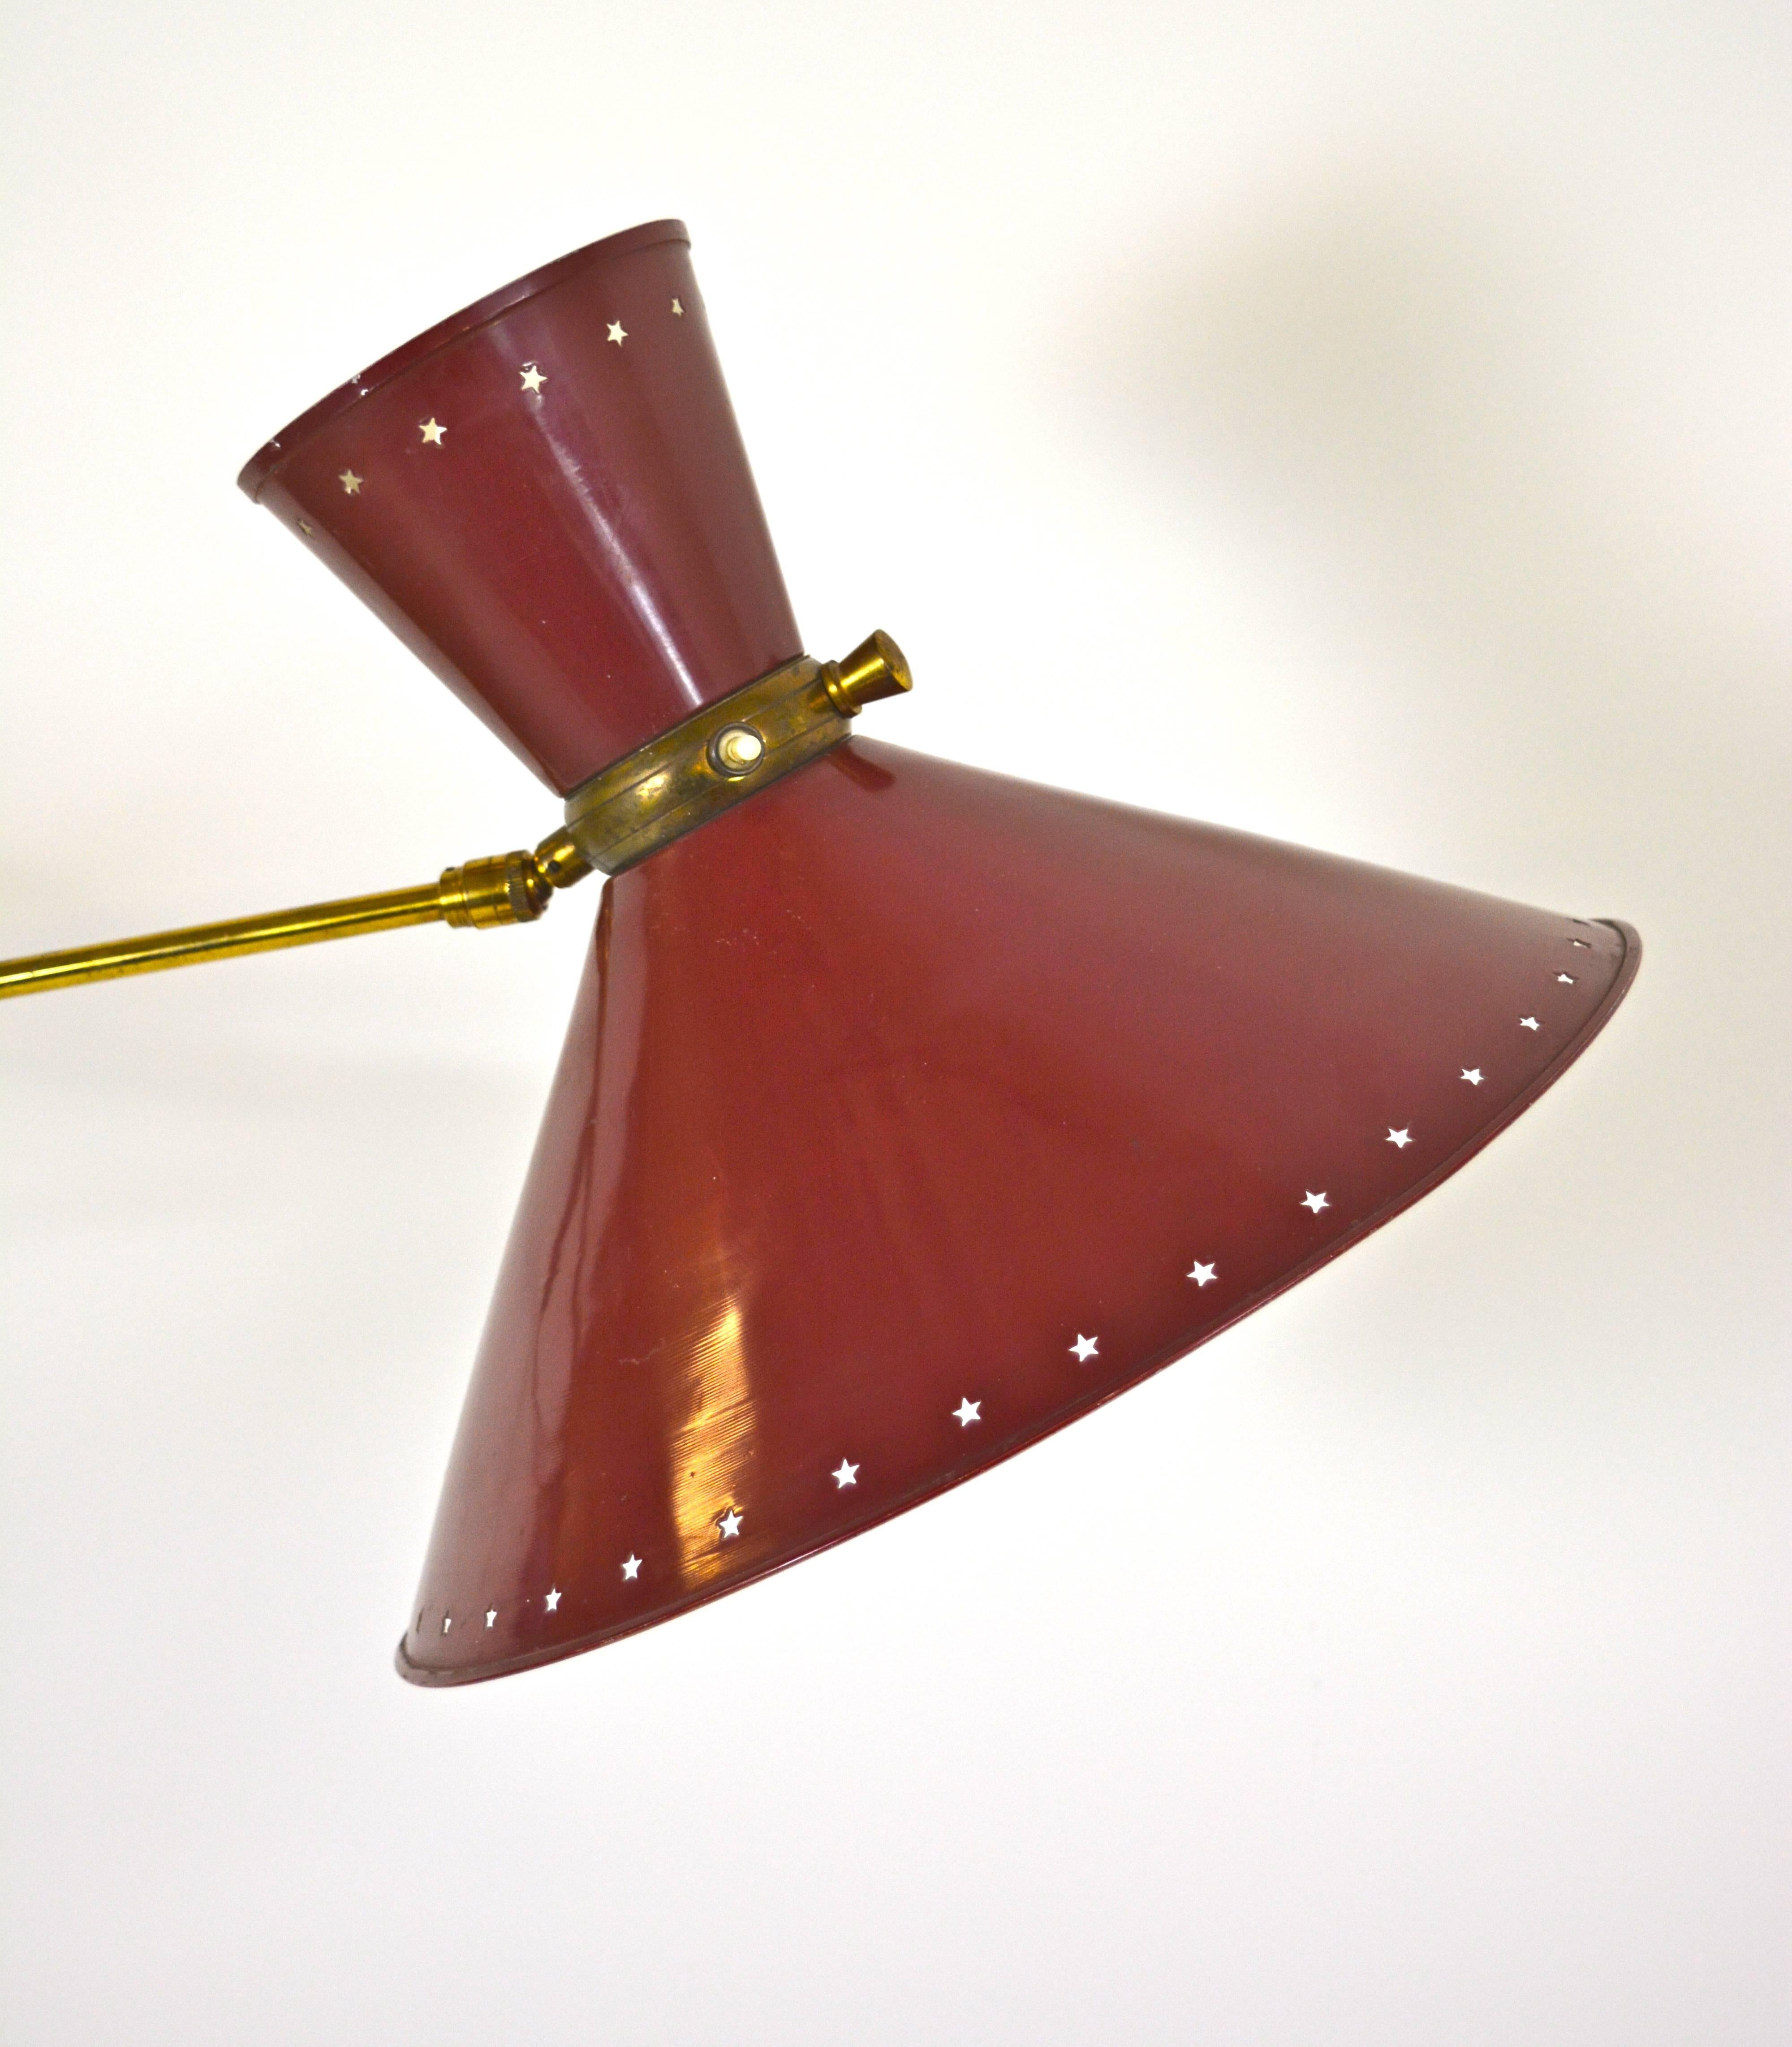 Brass fixture with articulating arm and original enameled red metal shade with star-shaped perforation. Designed by Rene Mathieu for Lunel, France, circa 1950. Light in each cone controlled independently.

 